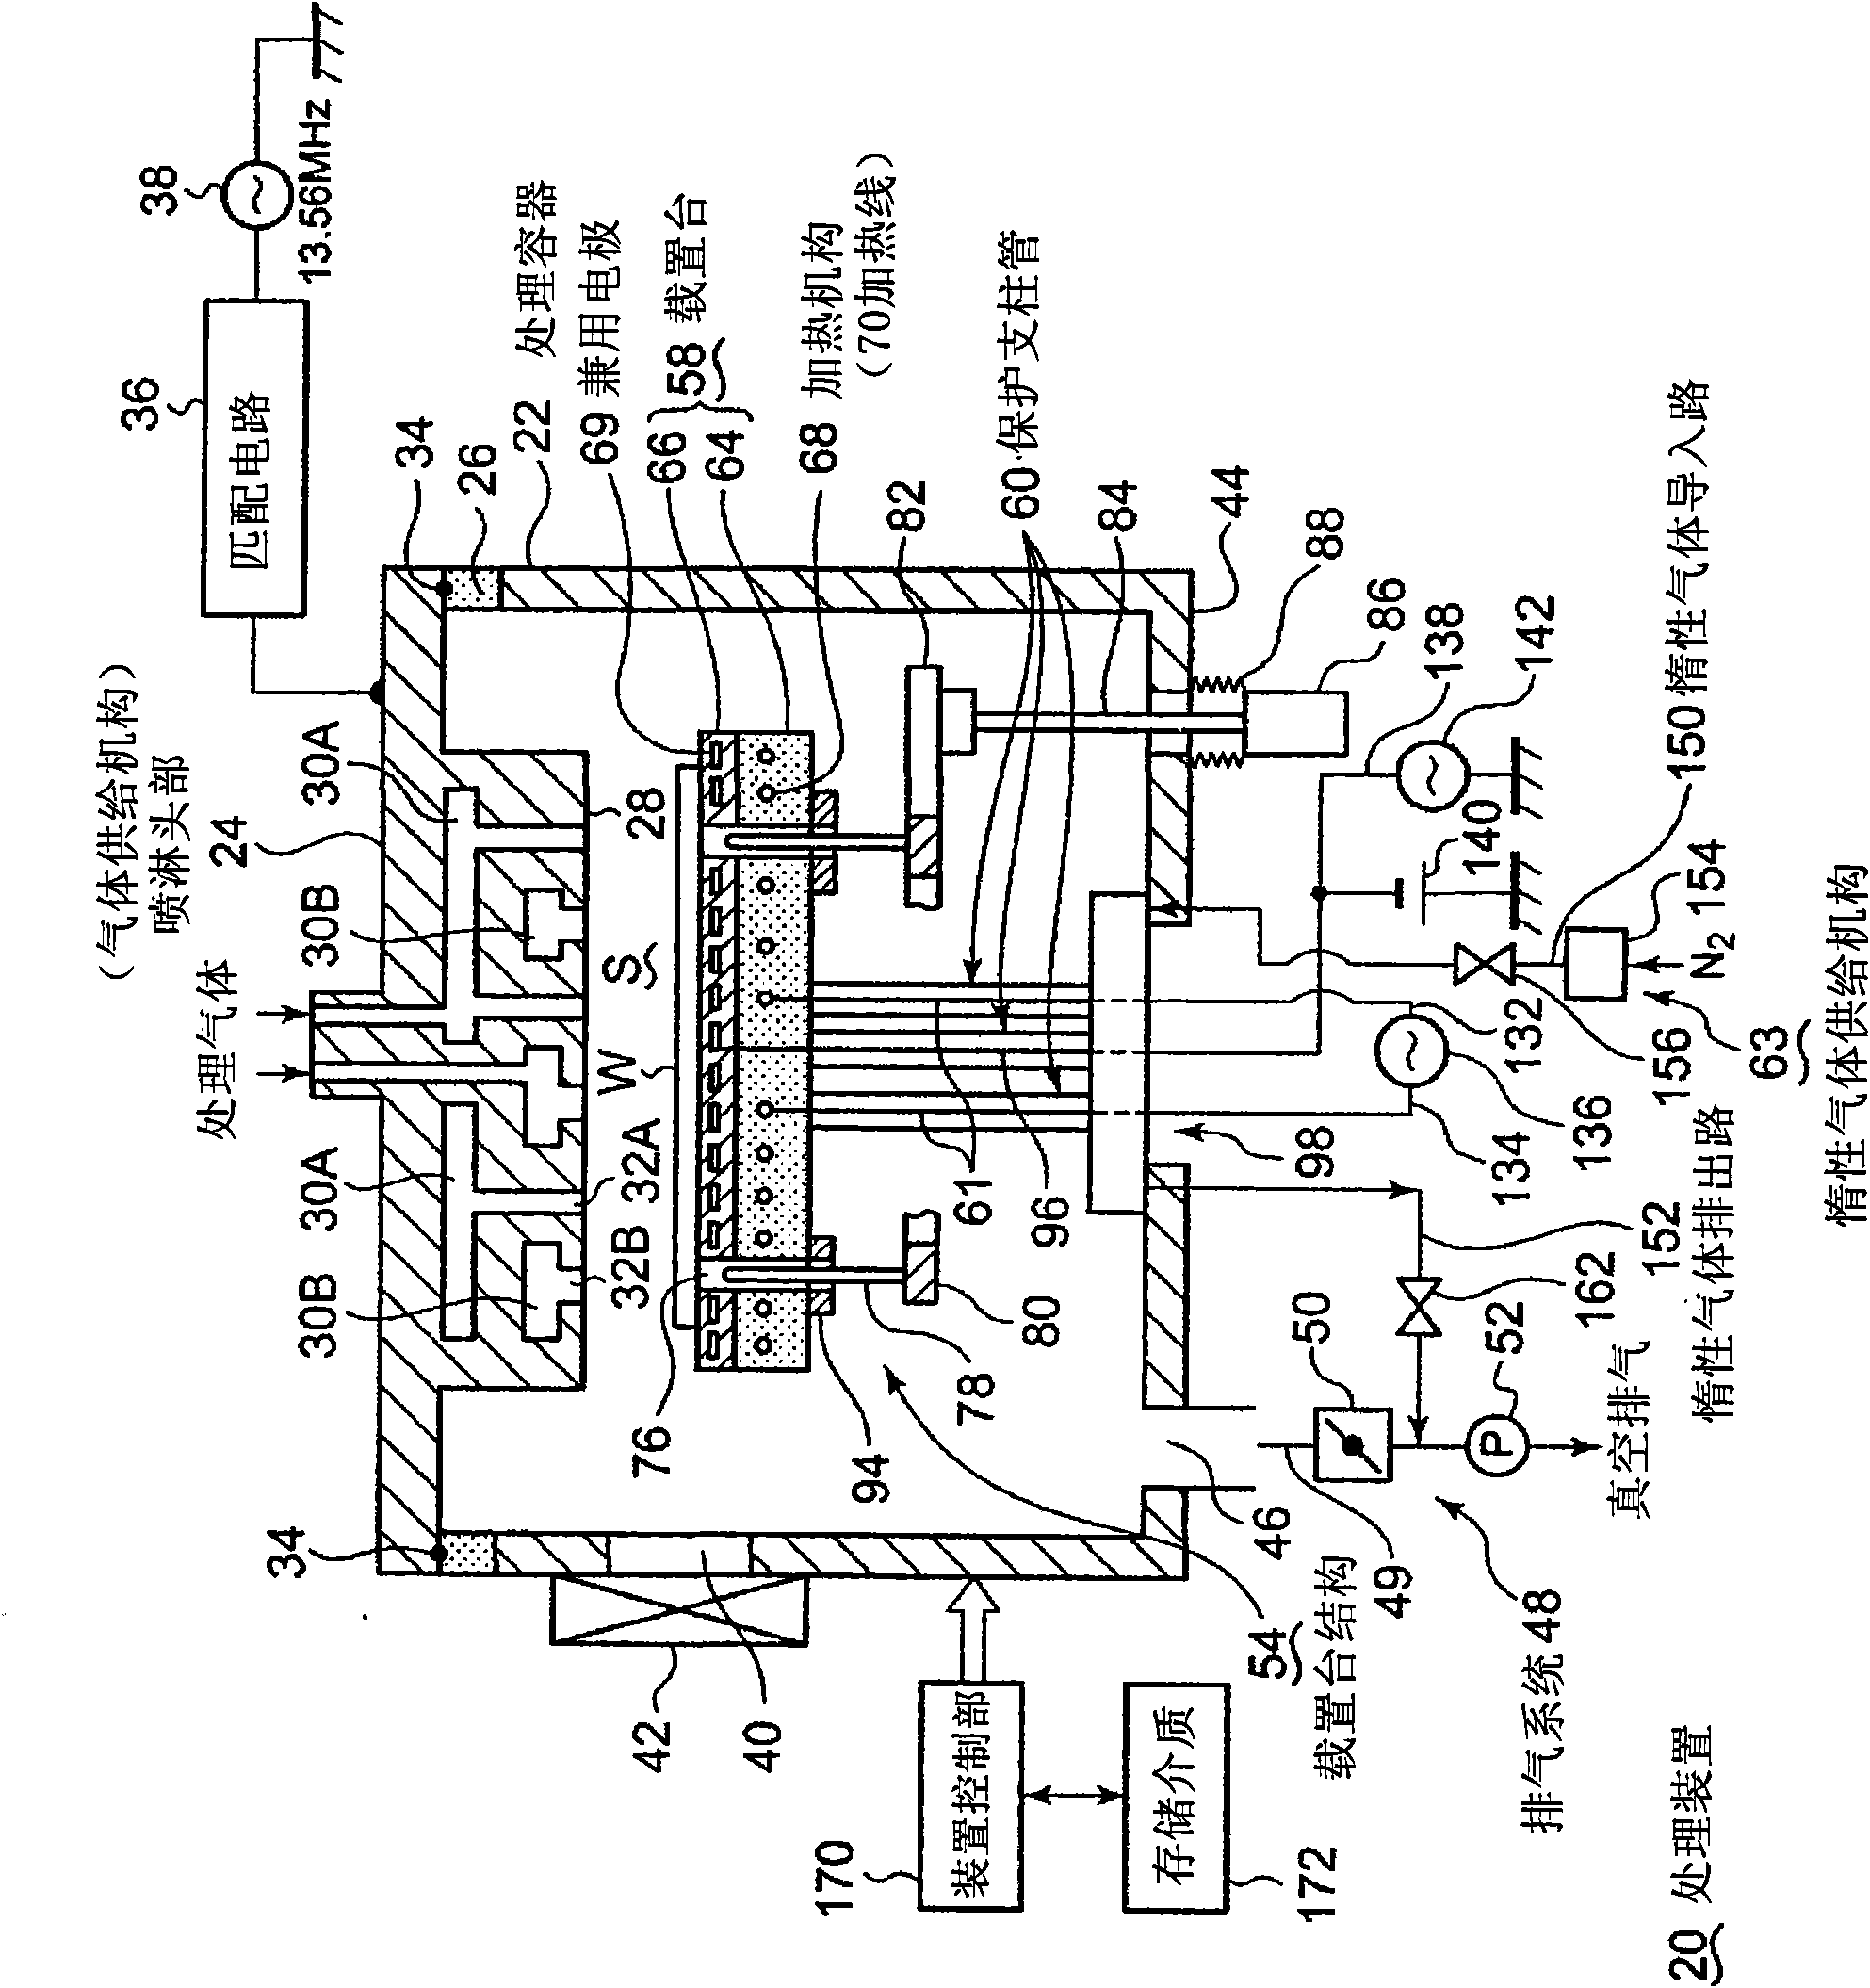 Susceptor structure and processing apparatus